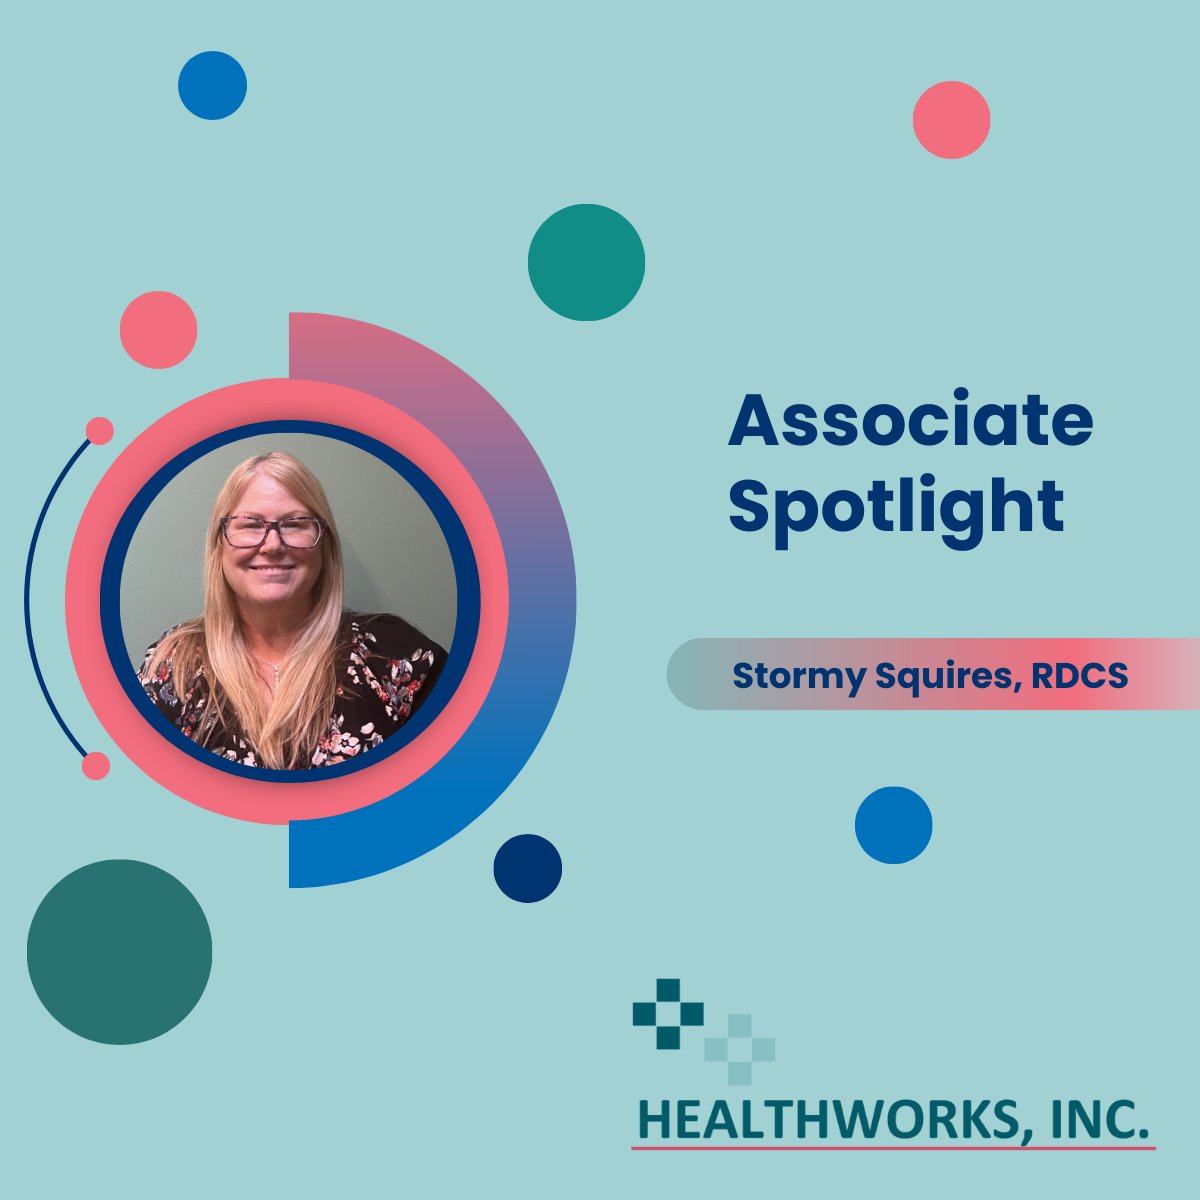 Healthworks is thrilled to announce the latest addition to our team: another talented sonographer! 🌟 Join us in welcoming Stormy Squires, RDCS as our newest member.
 #Healthworks #Sonographer #TeamExpansion #Healthcare #CardiovascularImaging #WelcomeNewMember